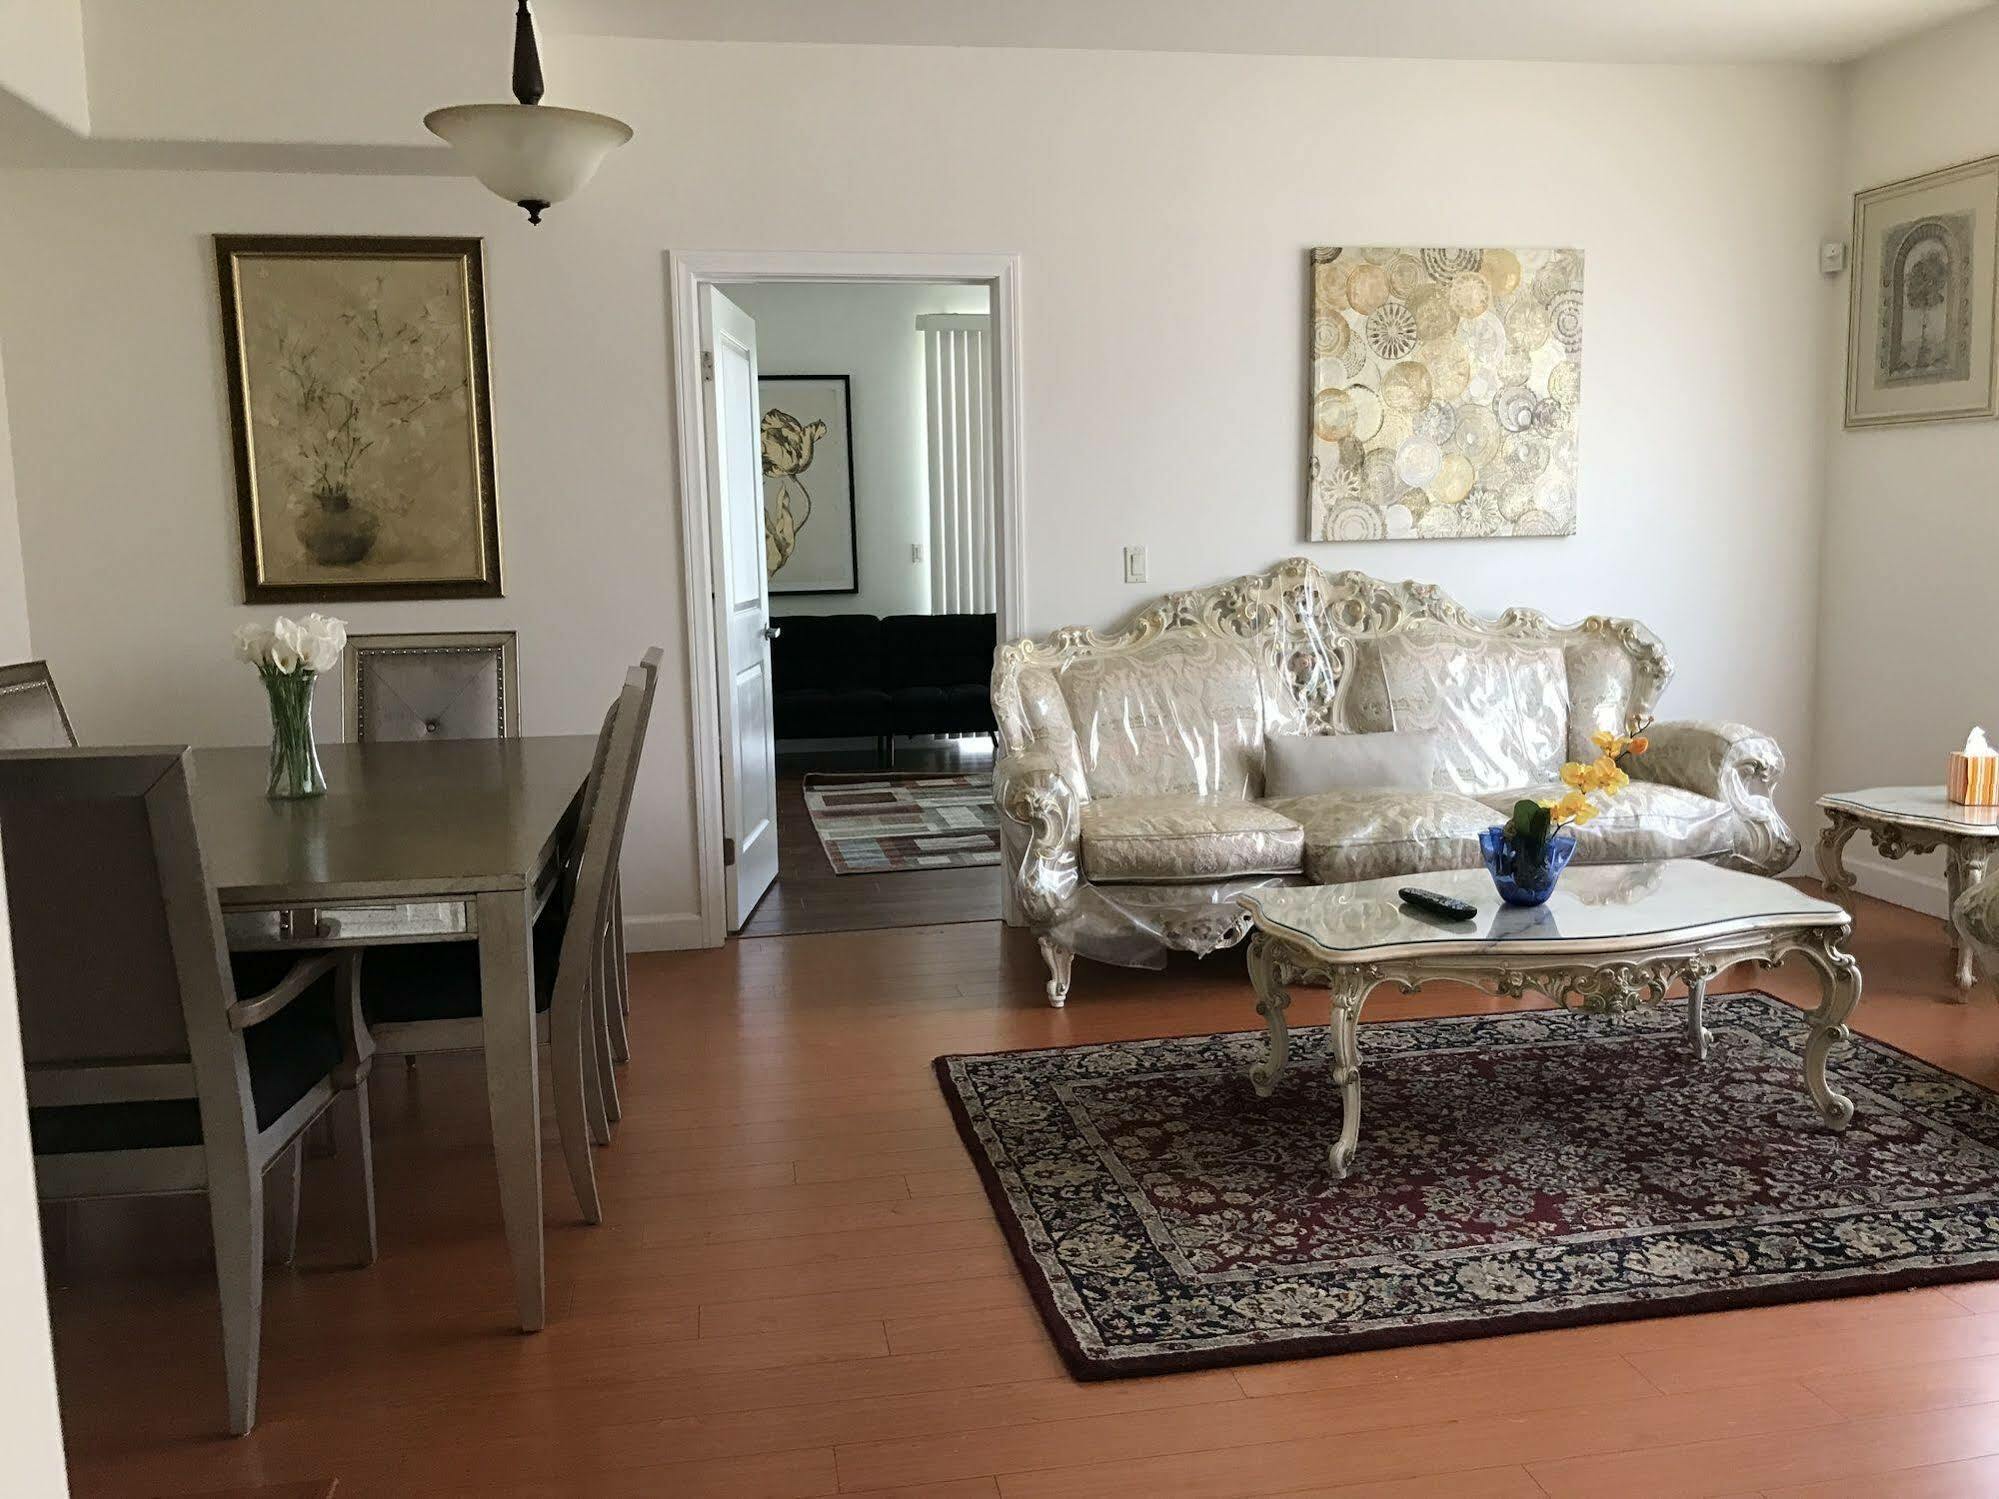 Fully Furnished Apartment In La Close To Beverly Hills Μπέβερλι Χιλς Εξωτερικό φωτογραφία